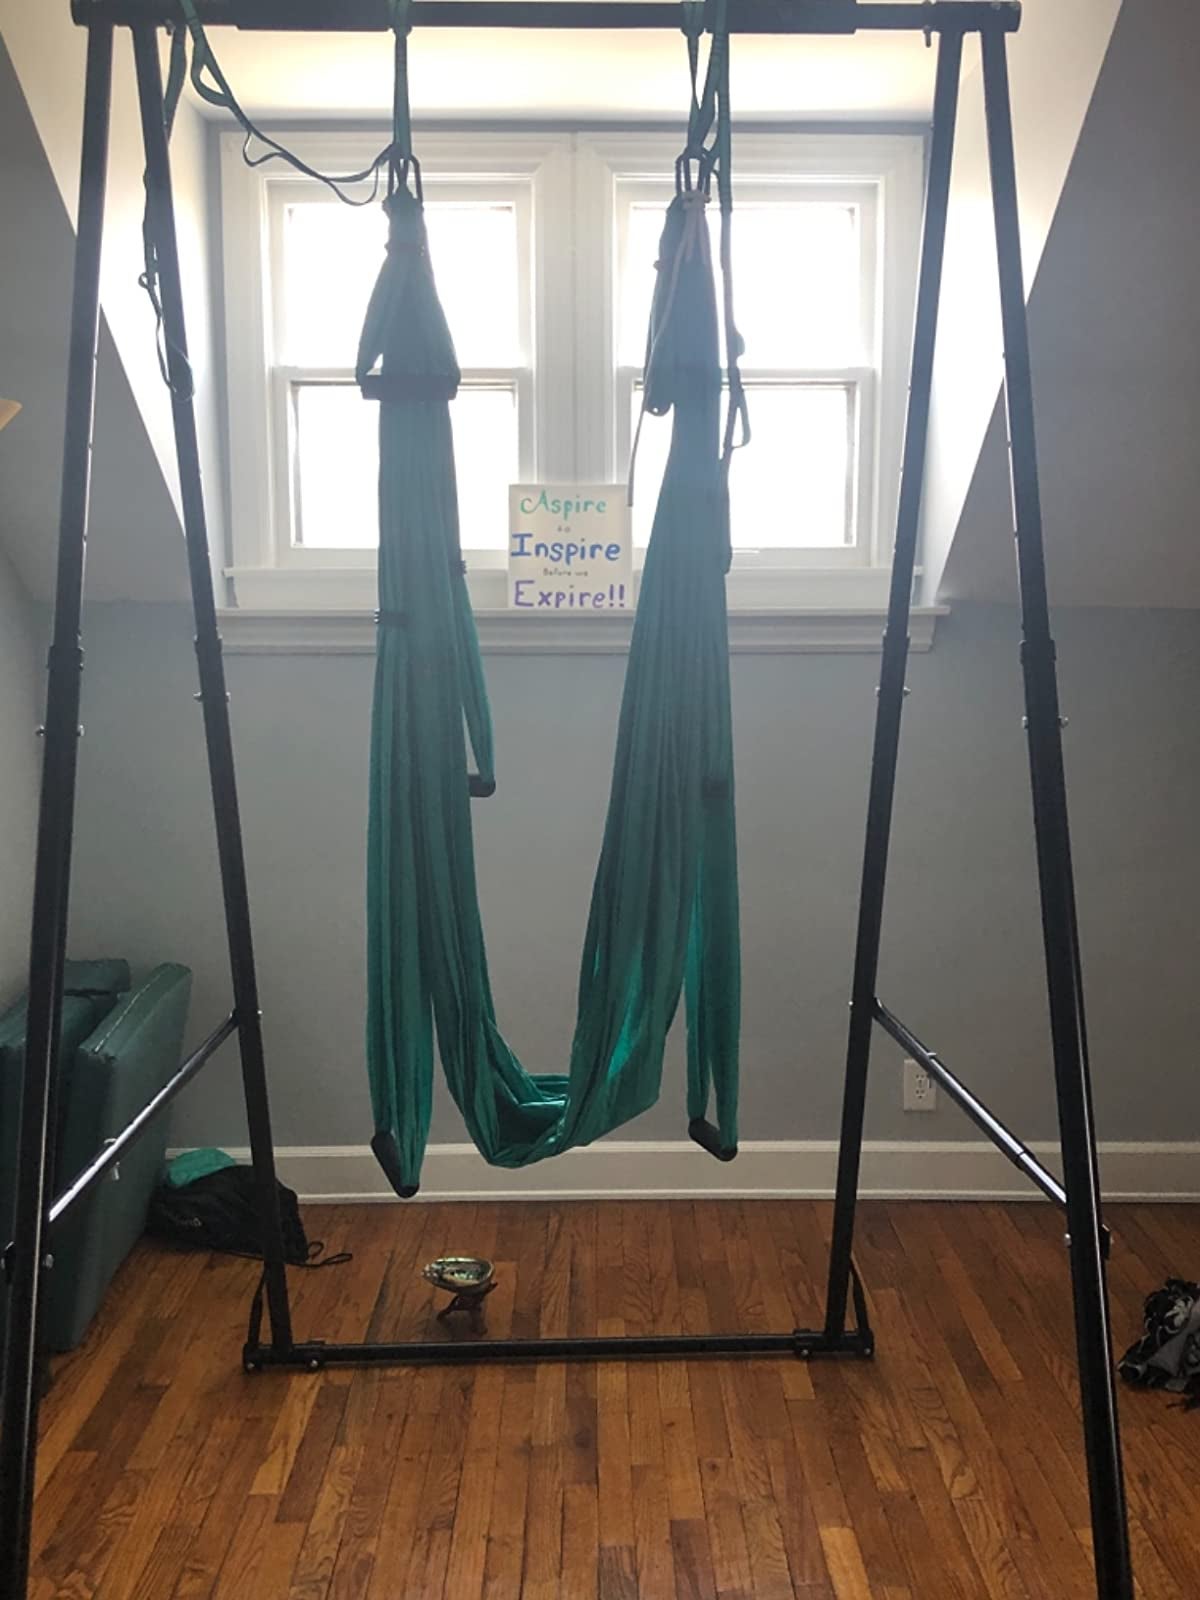 Green yoga sling set up in middle of room